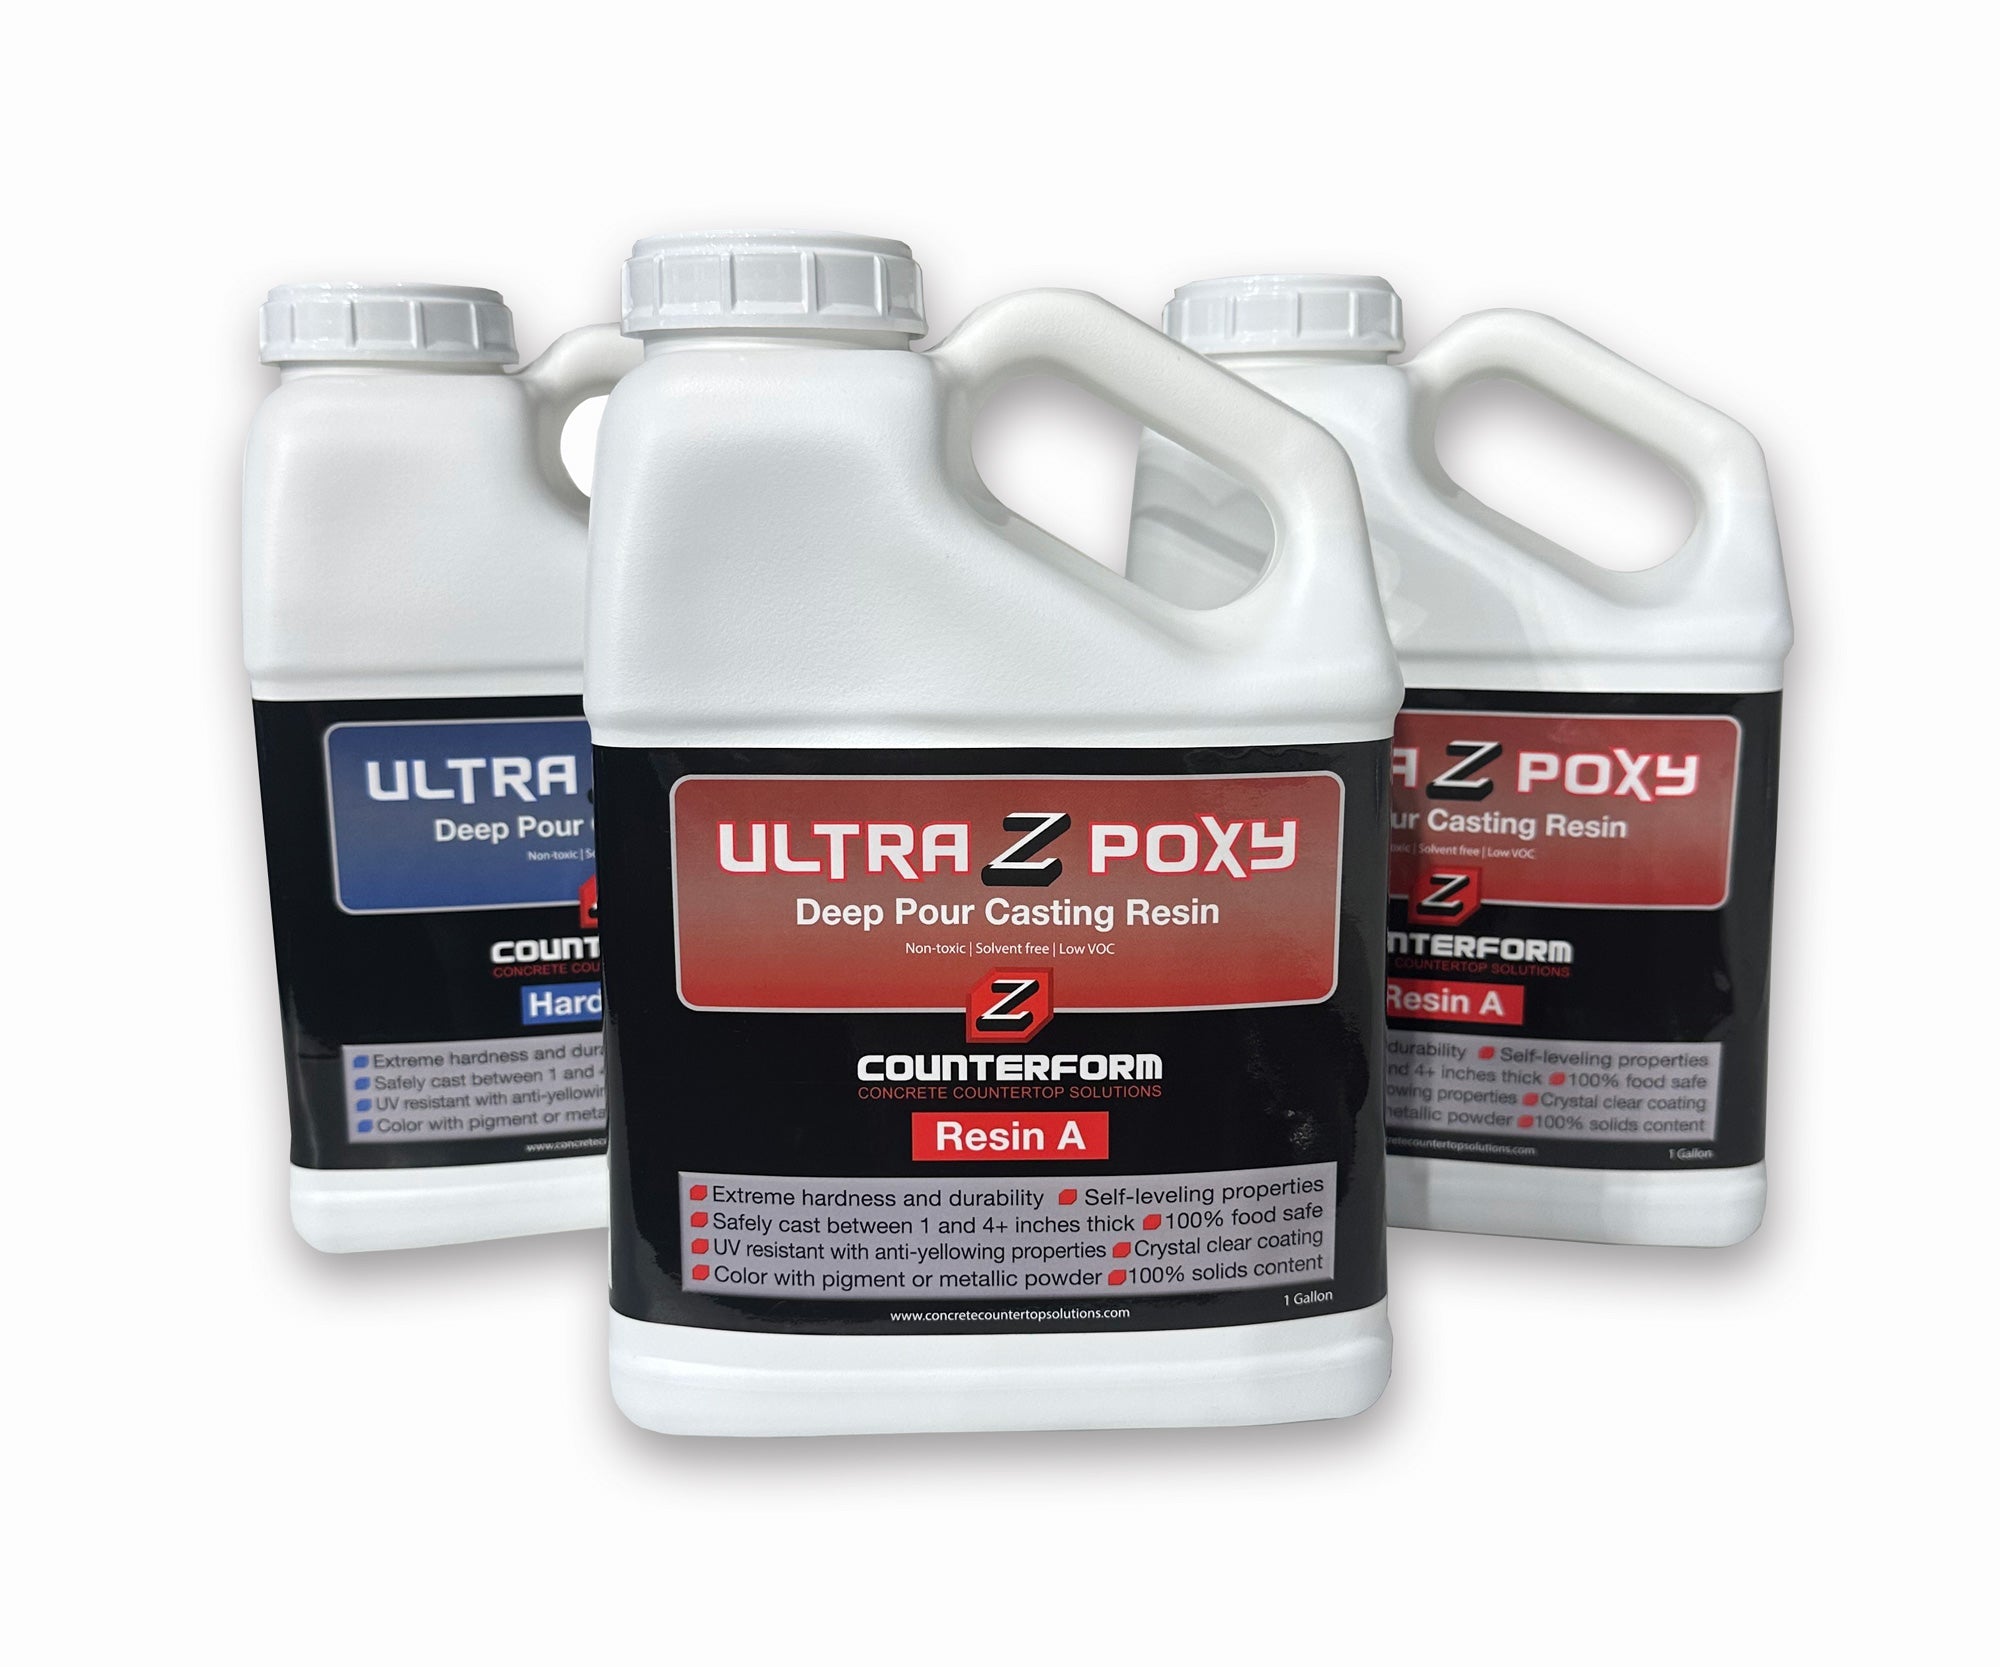 Ultra Z Poxy: Deep Pour Casting Resin (3 Gallons)